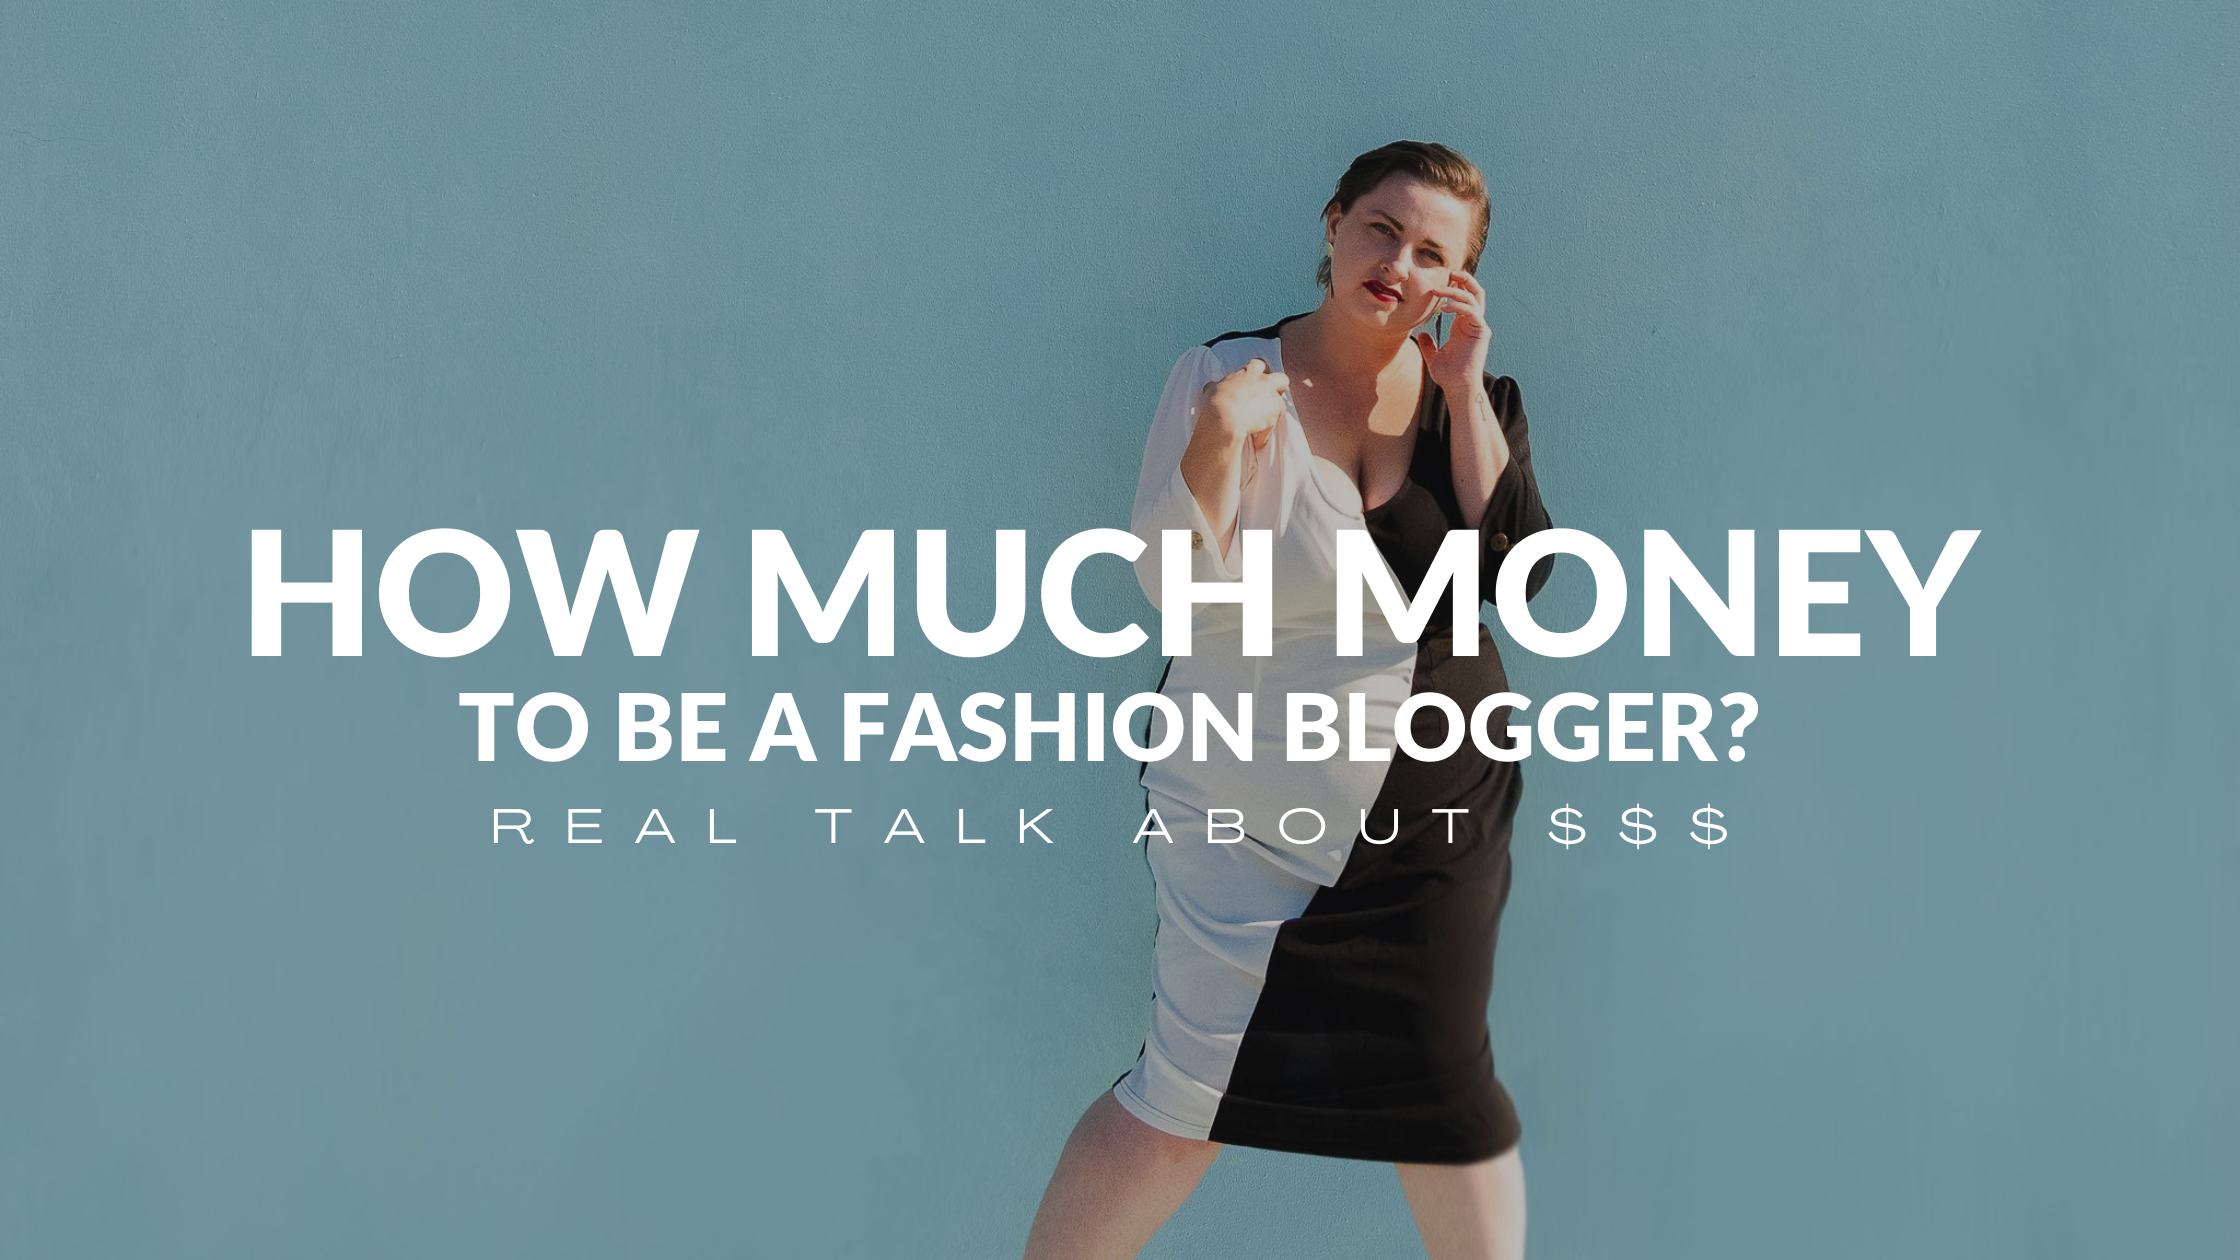 How to Make Money as a Fashion Blogger